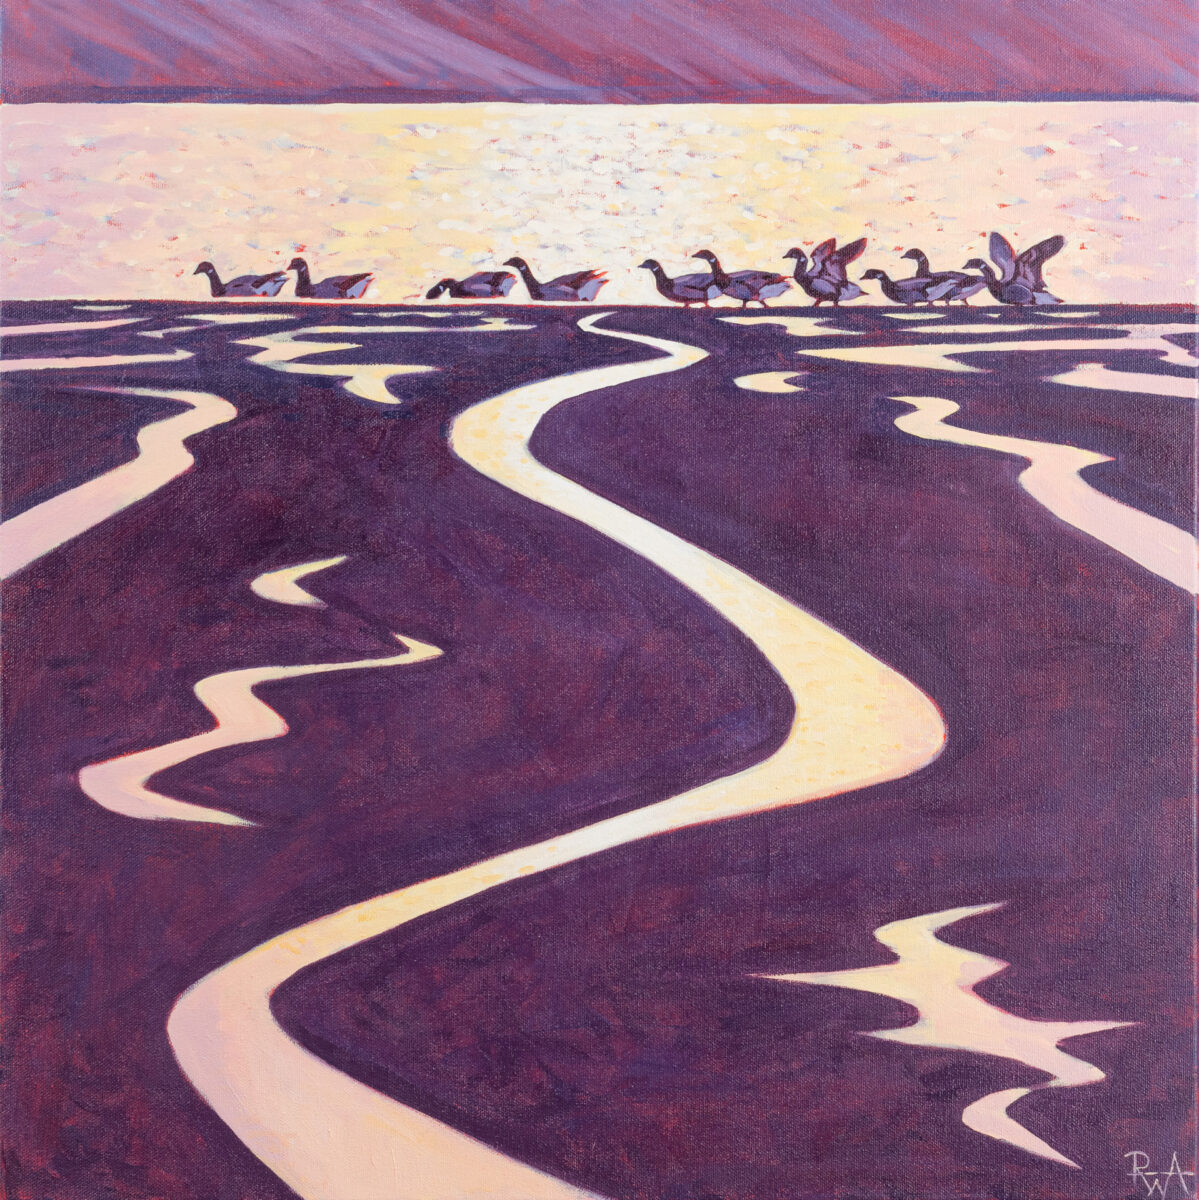 Artwork image titled: Brents Going to Roost